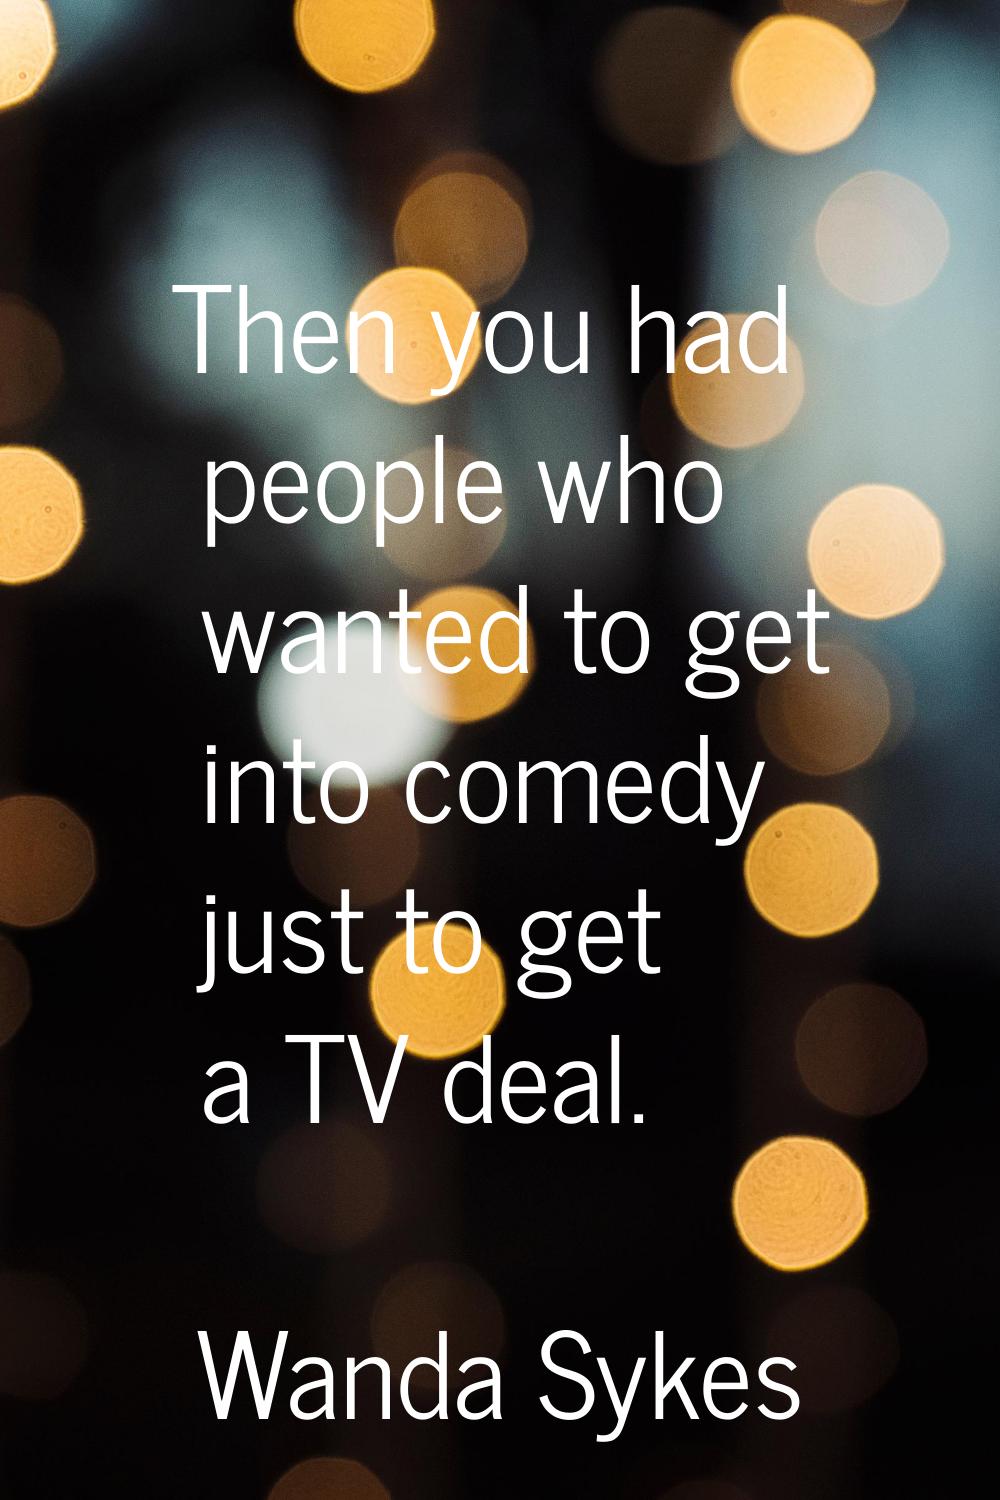 Then you had people who wanted to get into comedy just to get a TV deal.